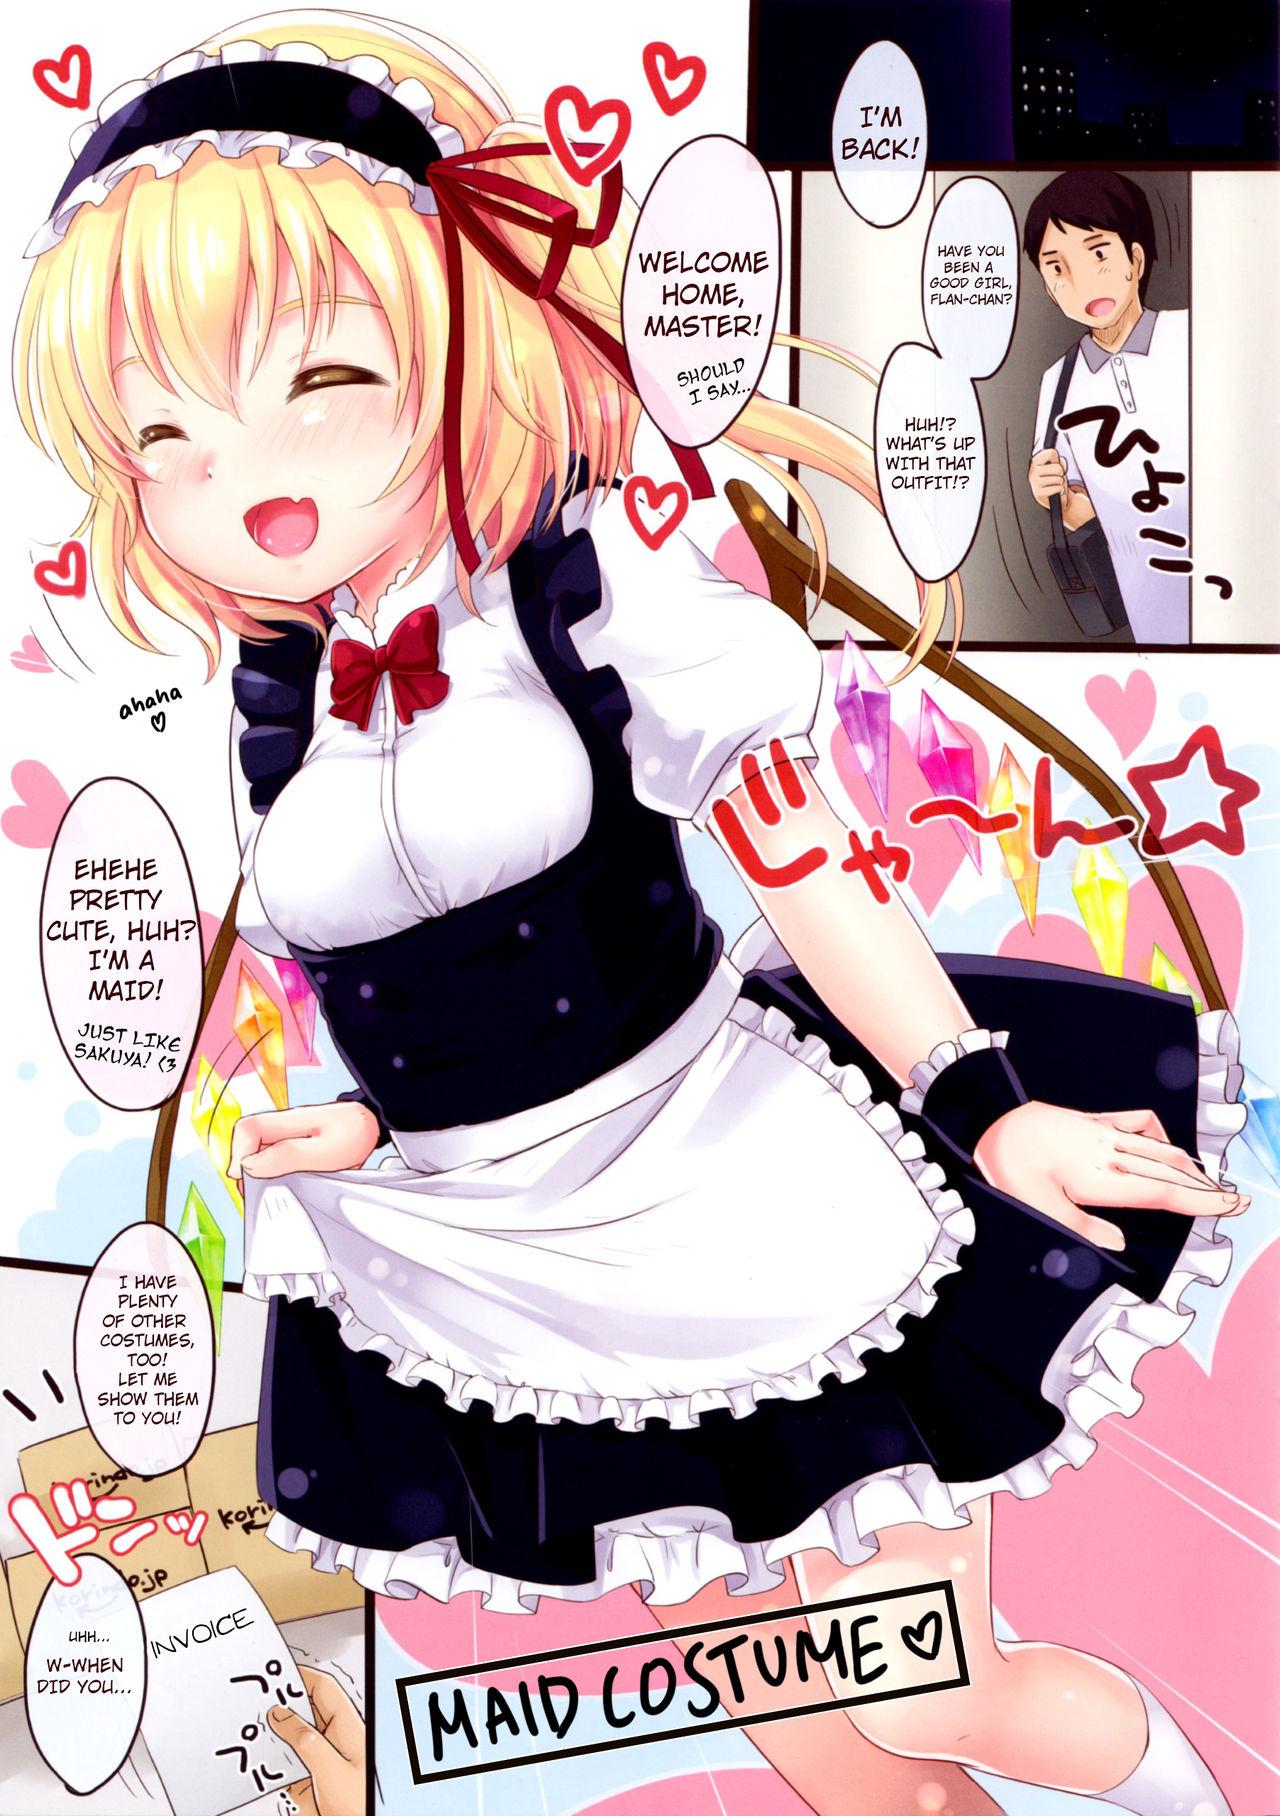 Skype Flan-chan High! - Touhou project Gay Anal - Page 2